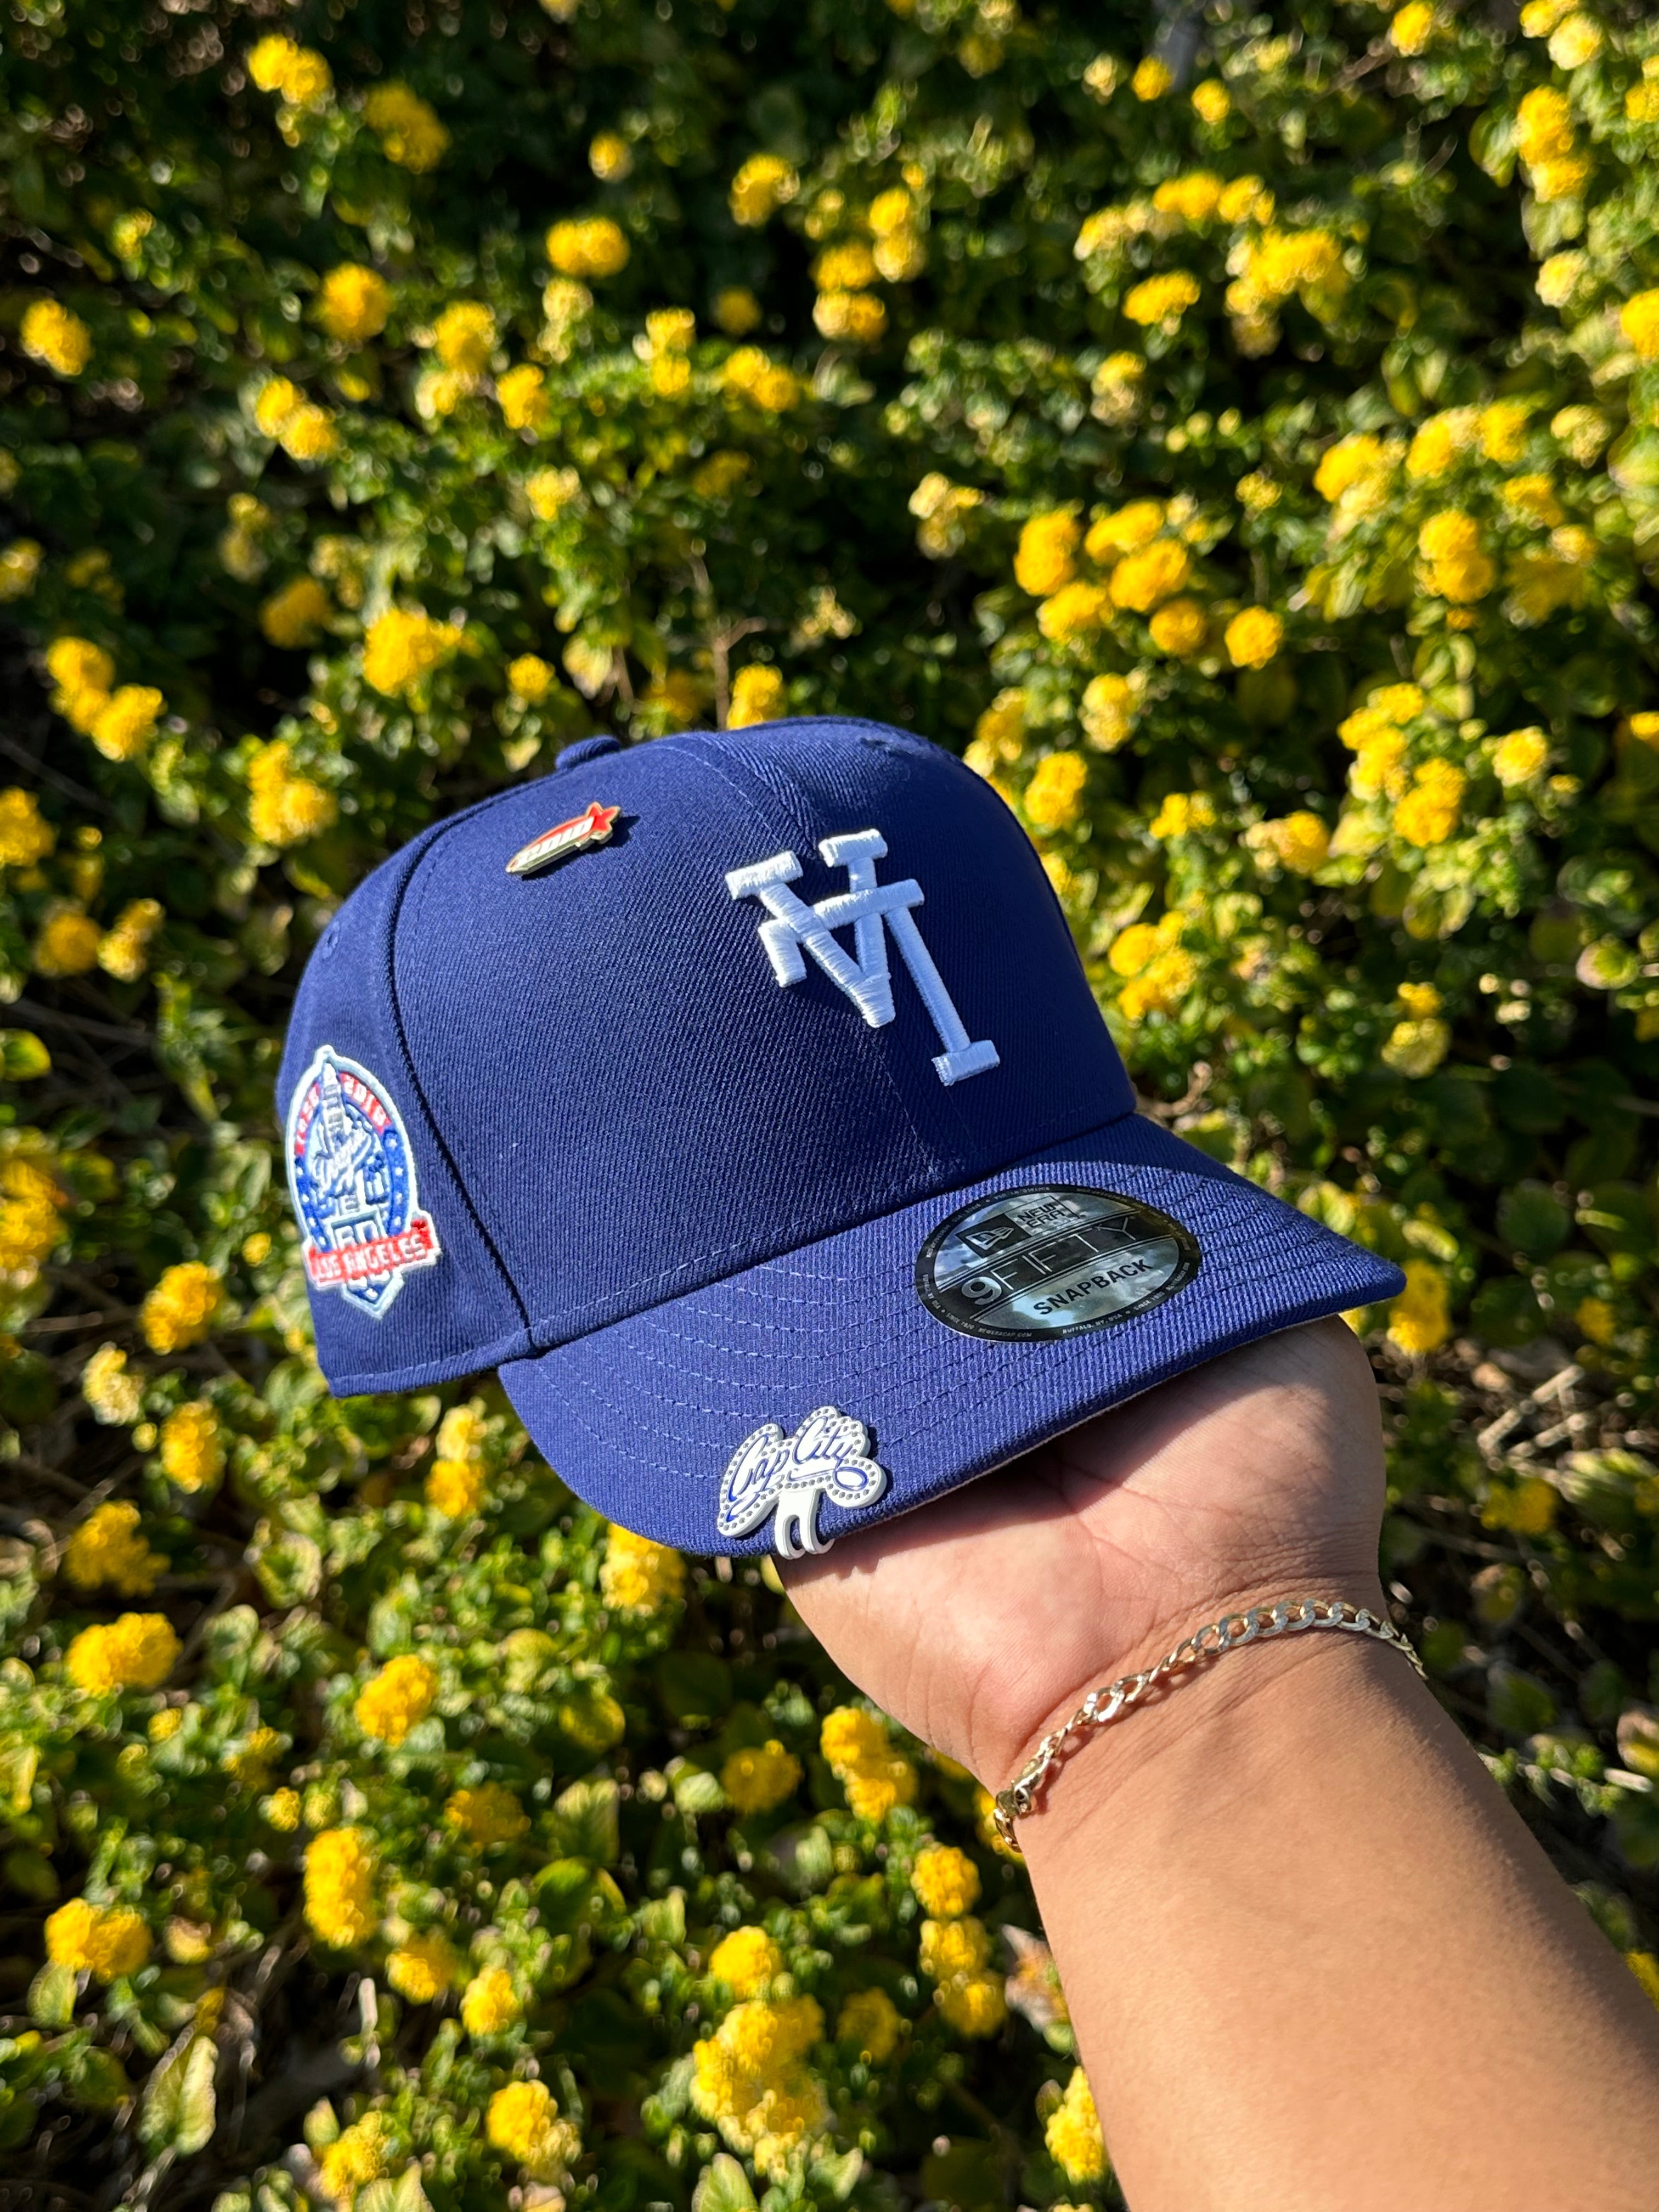 NEW ERA EXCLUSIVE 9FIFTY BLUE UPSIDE DOWN LOS ANGELES DODGERS SNAPBACK W/ 60TH ANNIVERSARY PATCH